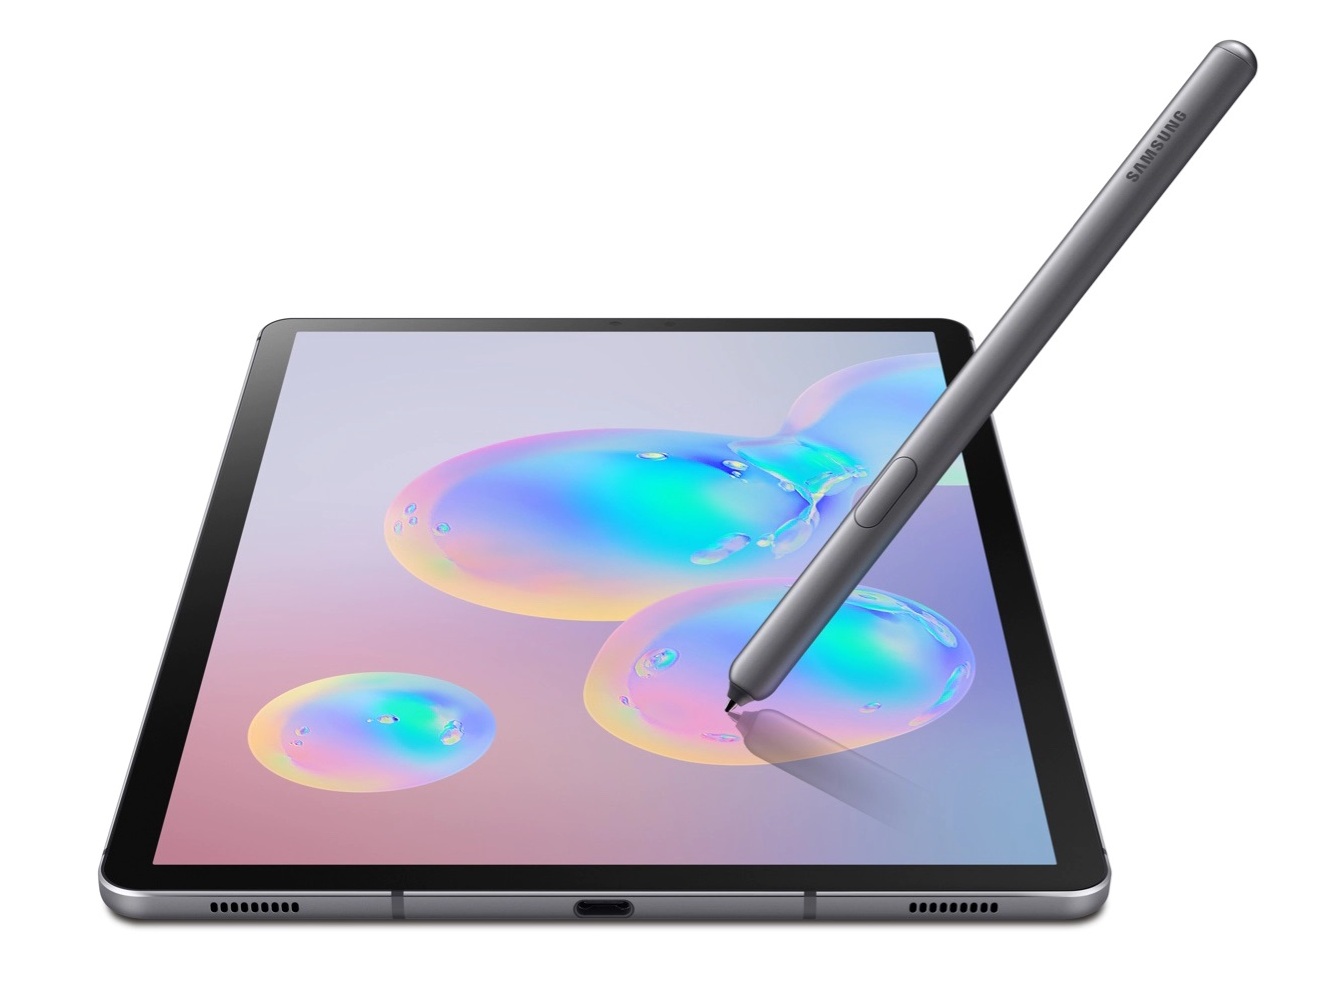 Samsung releasing stock on its Galaxy Tab S6 10.5 for just $ 430 USD